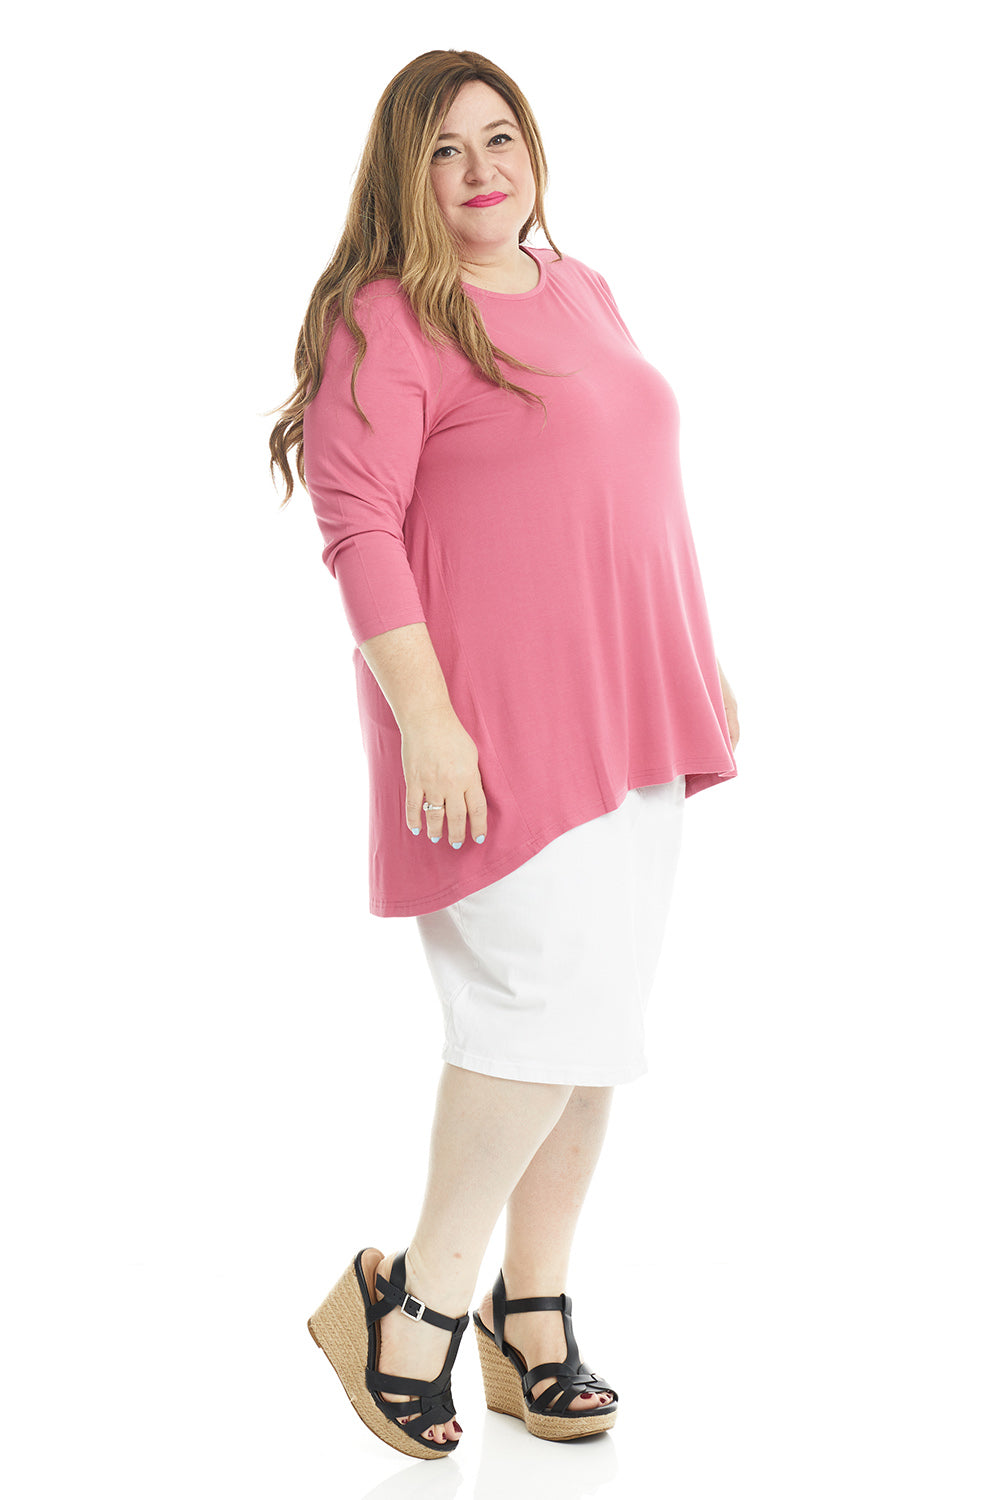 vibrant pink high-low loose tunic top for plus size women good for maternity